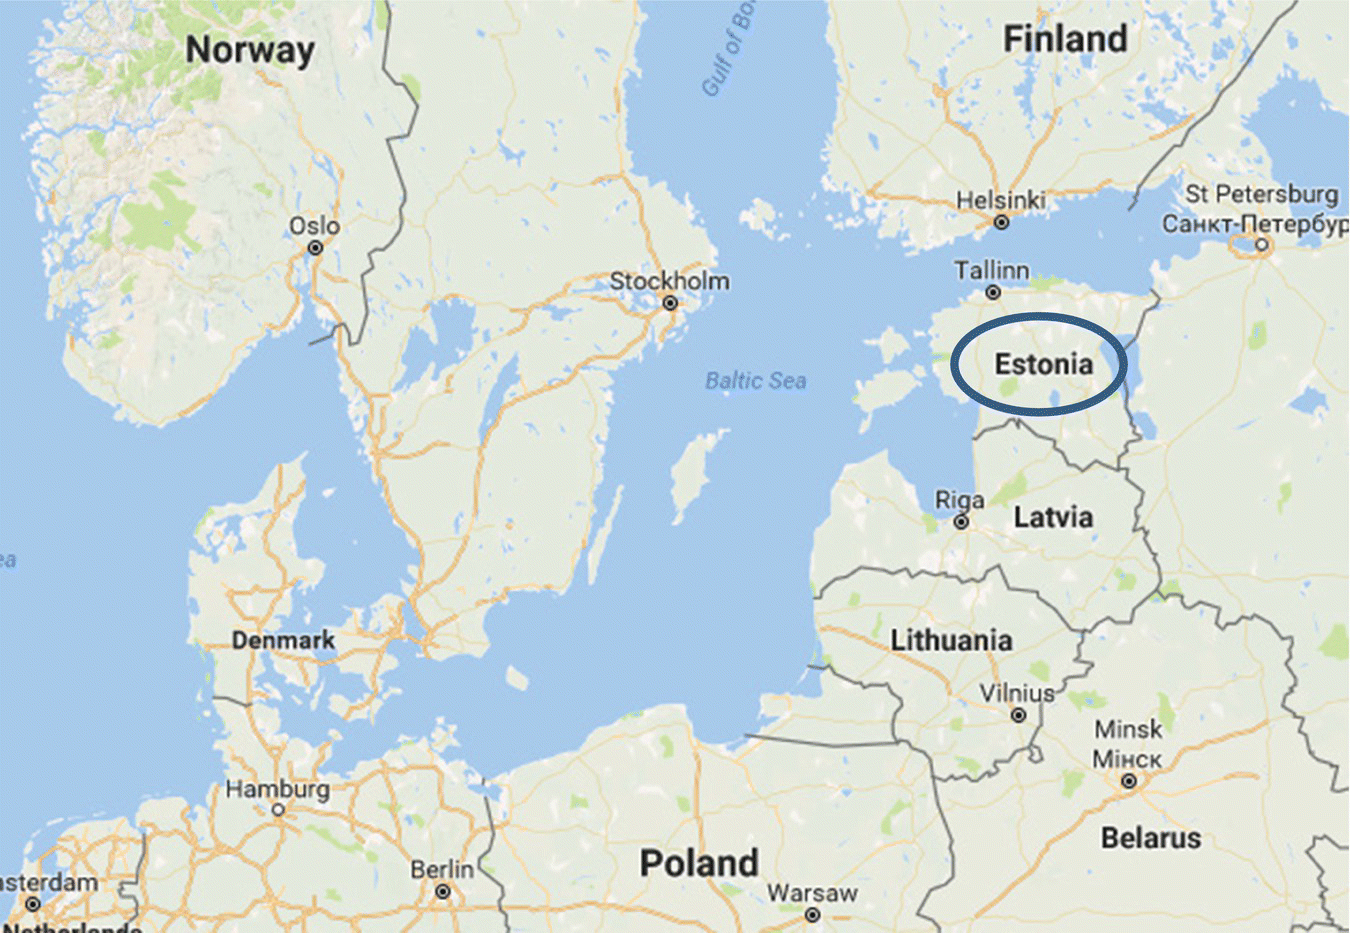 Map of Northern Europe with Estonia (encircled).